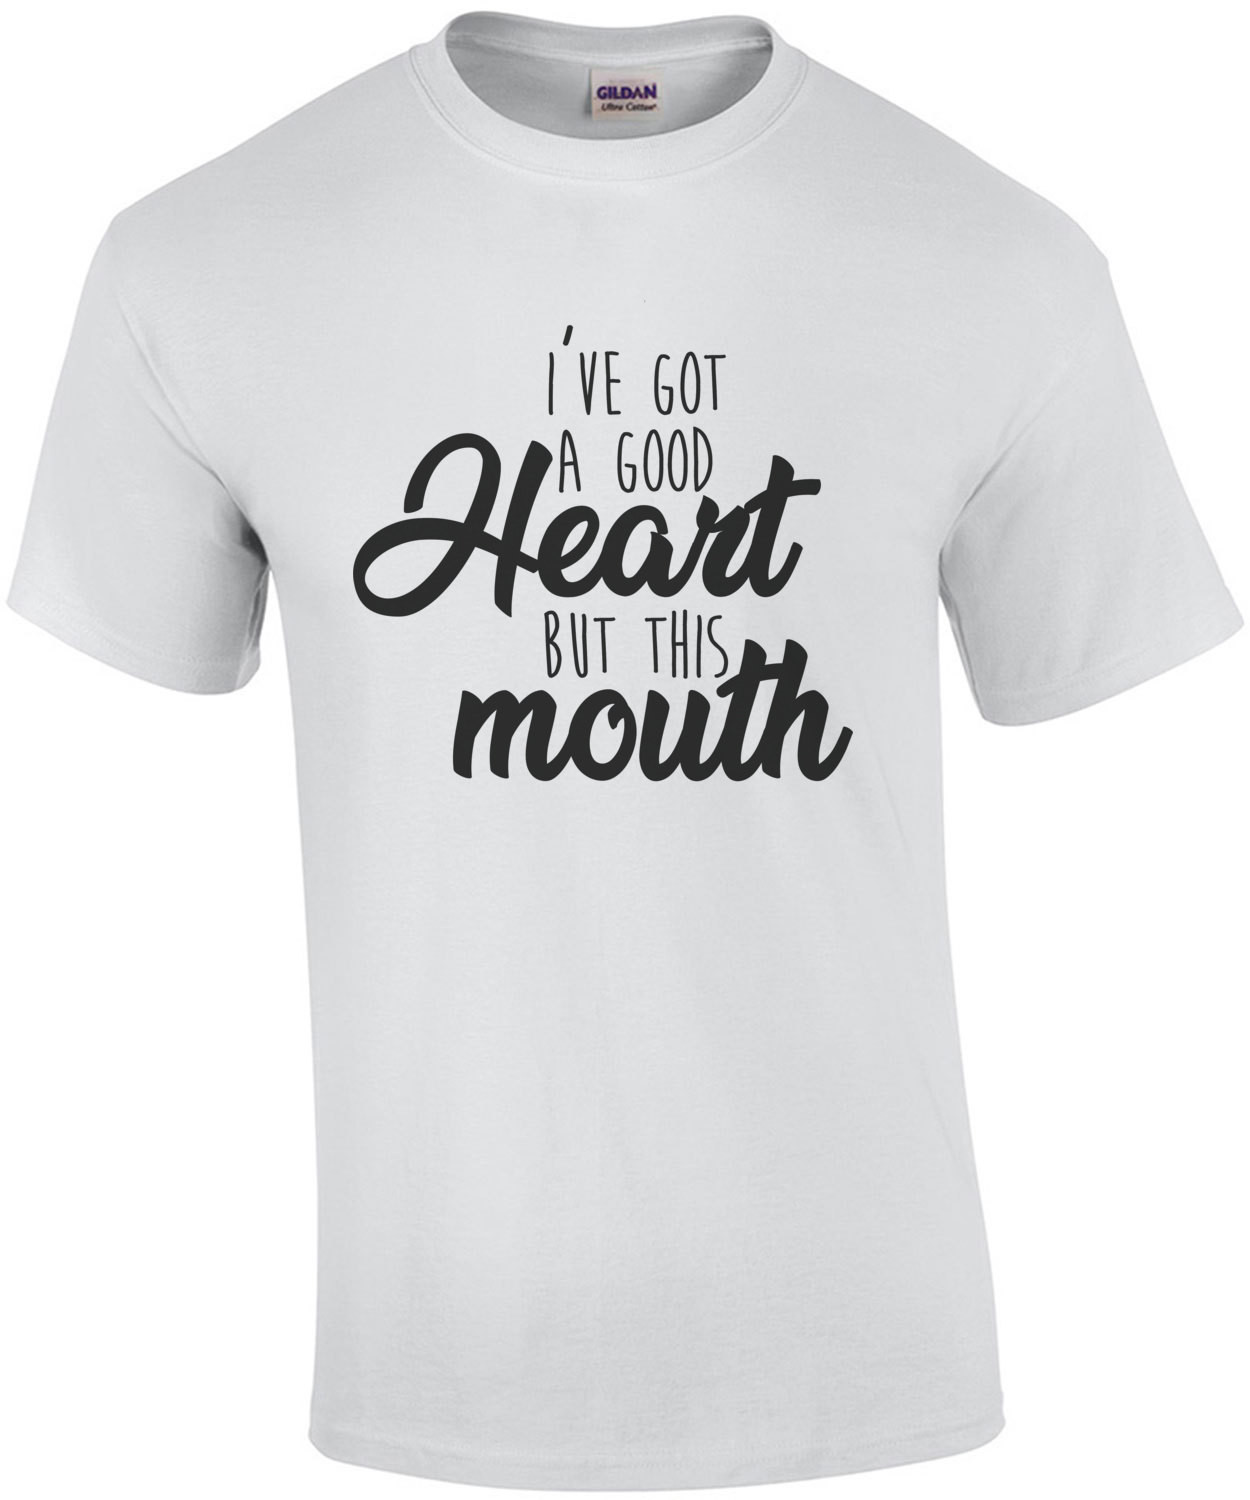 I've got a good heart but this mouth - funny t-shirt